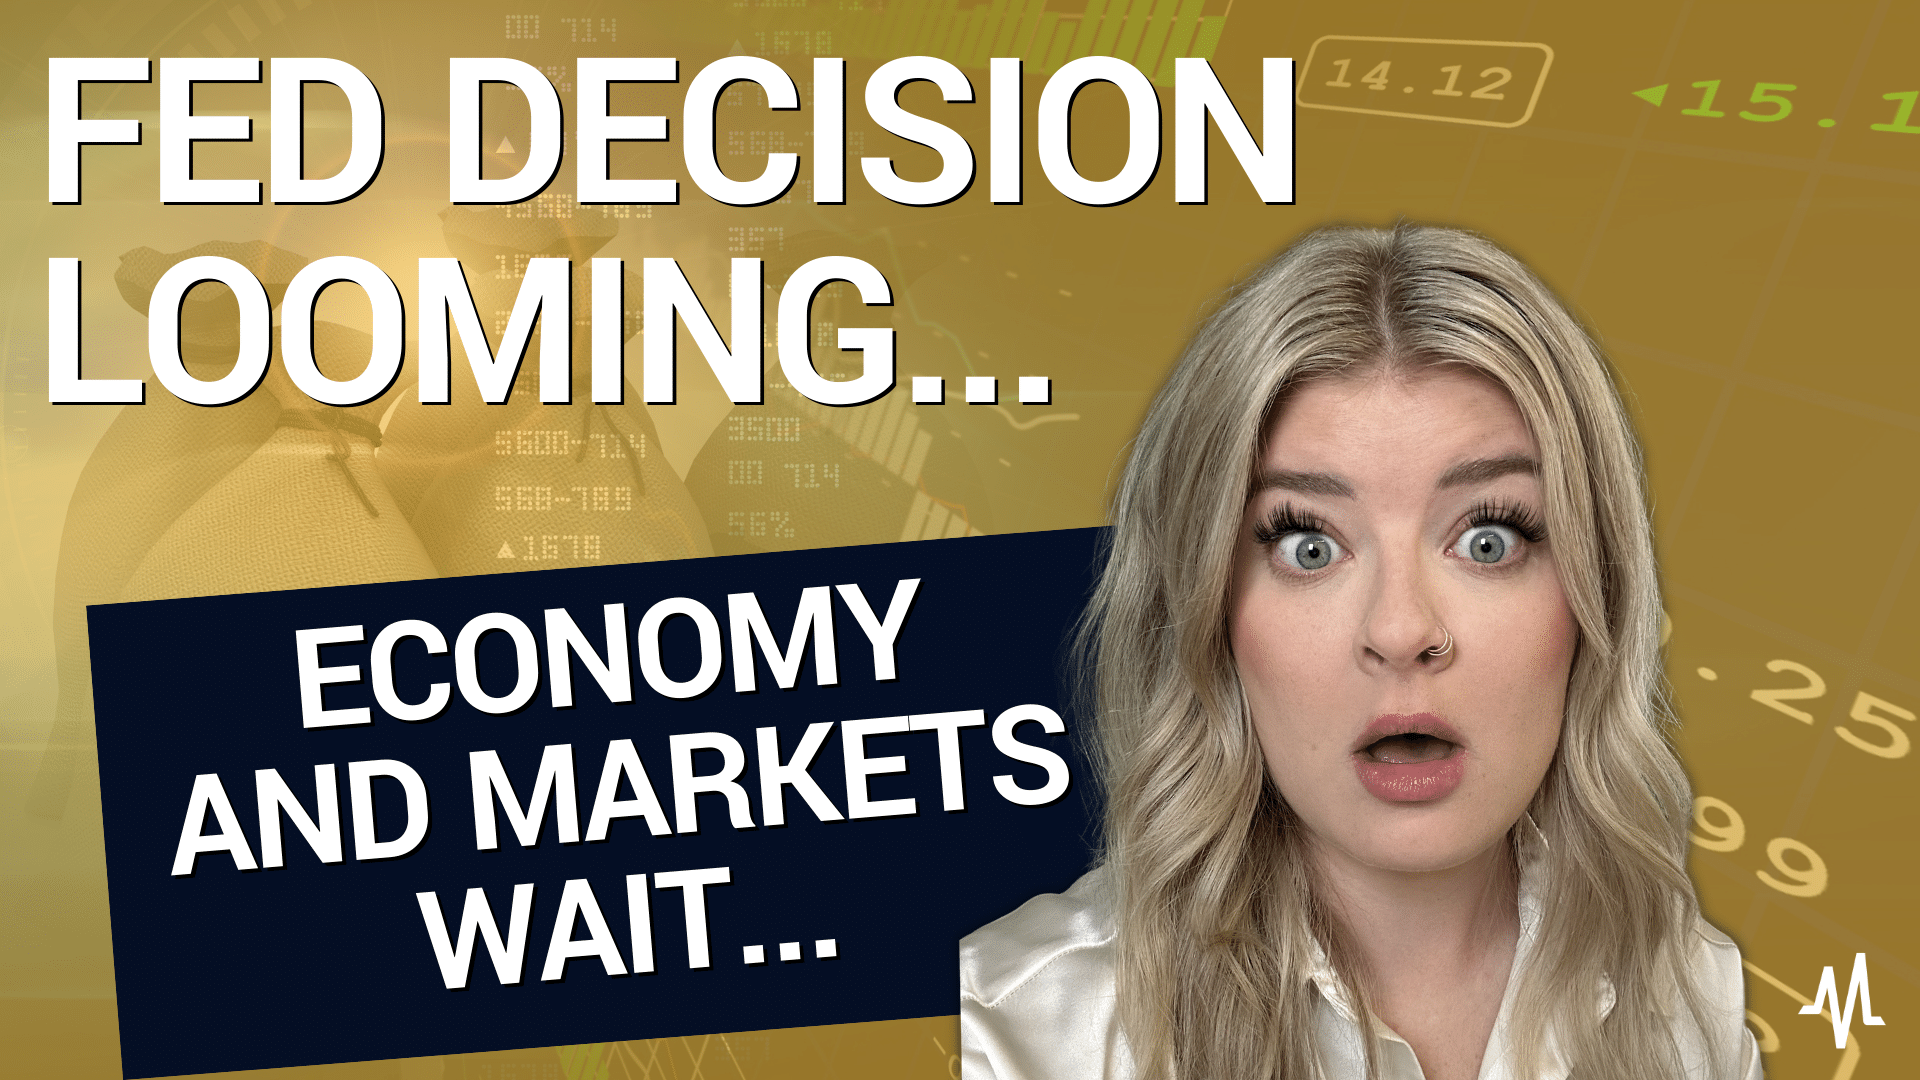 With Fed Decision Looming, Economy and Markets Wait...